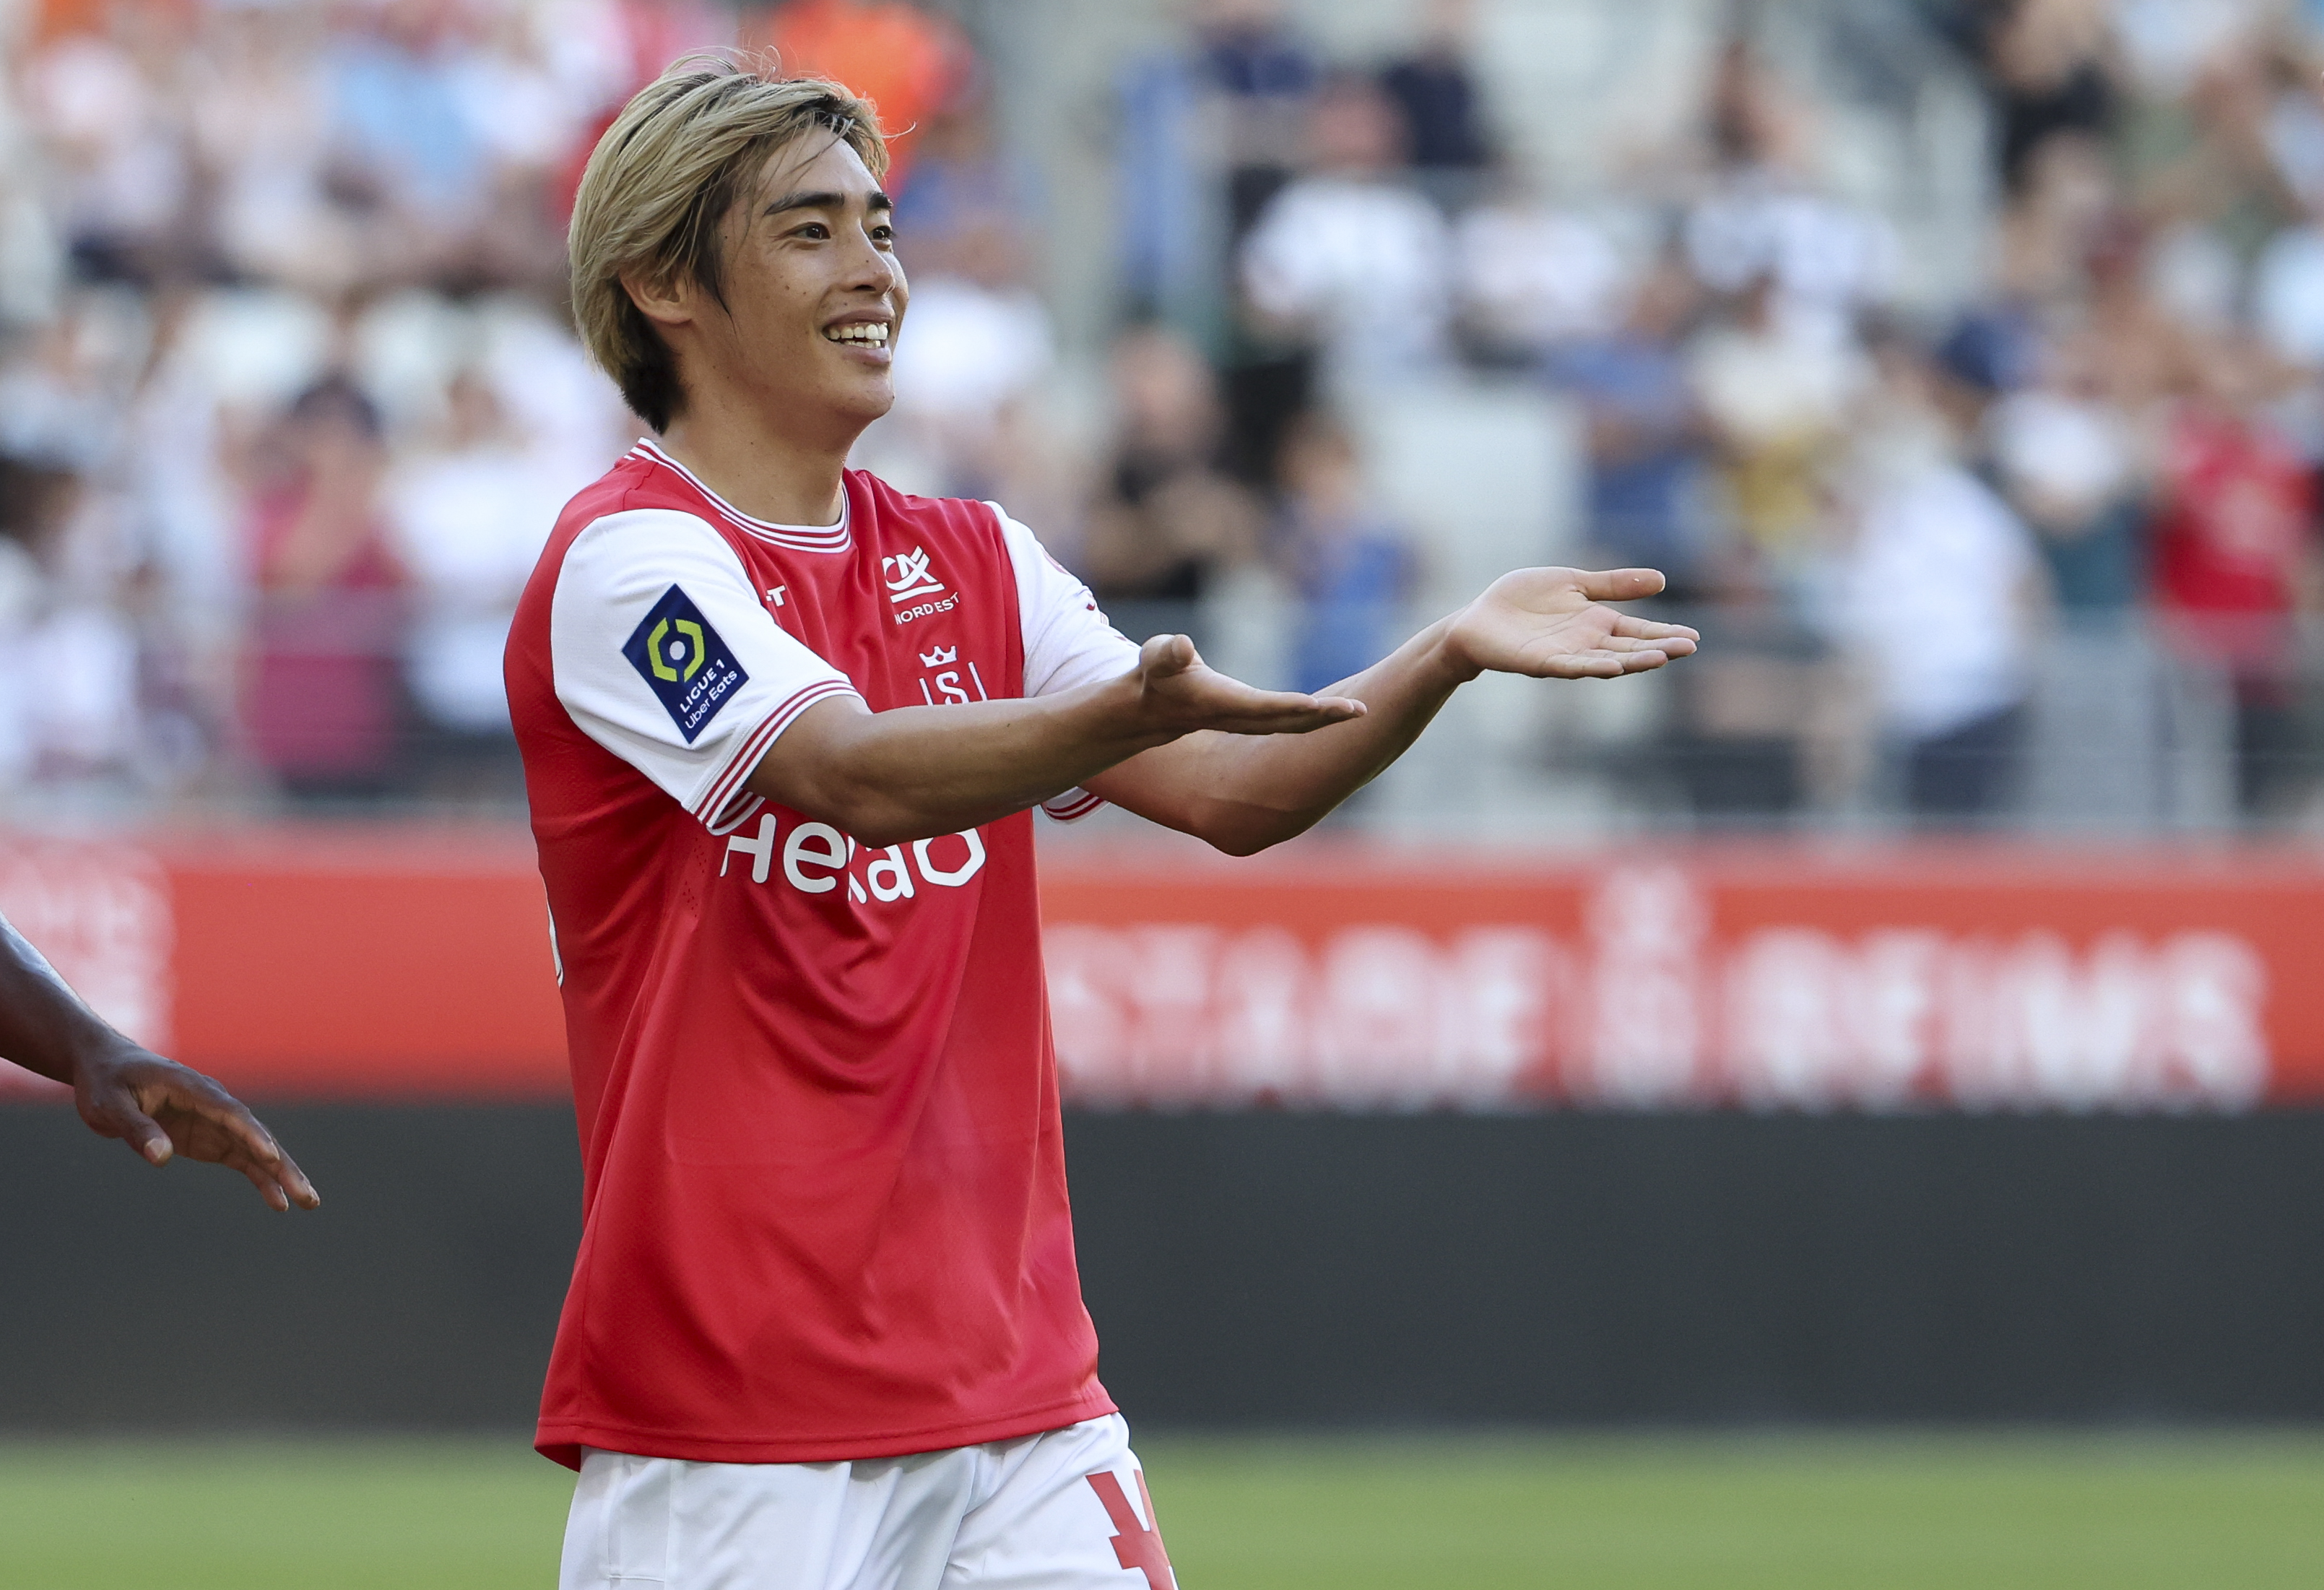 OptaJean on X: "3 - Junya Ito (Reims) is only the third Japanese player ever to score a goal in Ligue 1, after Daisuke Matsui (17) and Hiroki Sakai (1). Samurai. #SDROL @